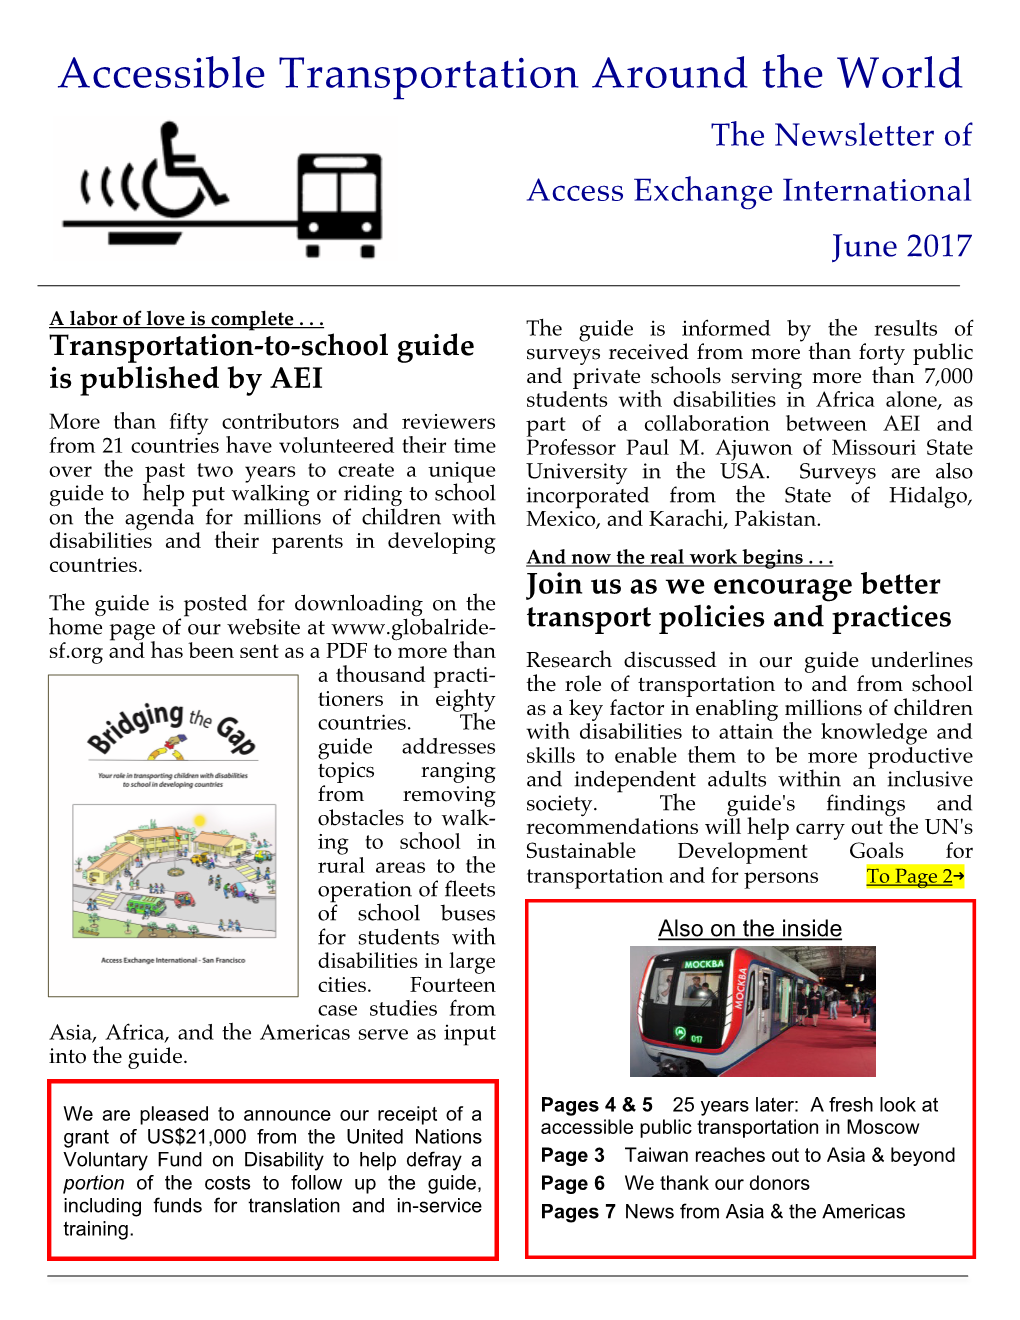 Accessible Transportation Around the World the Newsletter of Access Exchange International June 2017